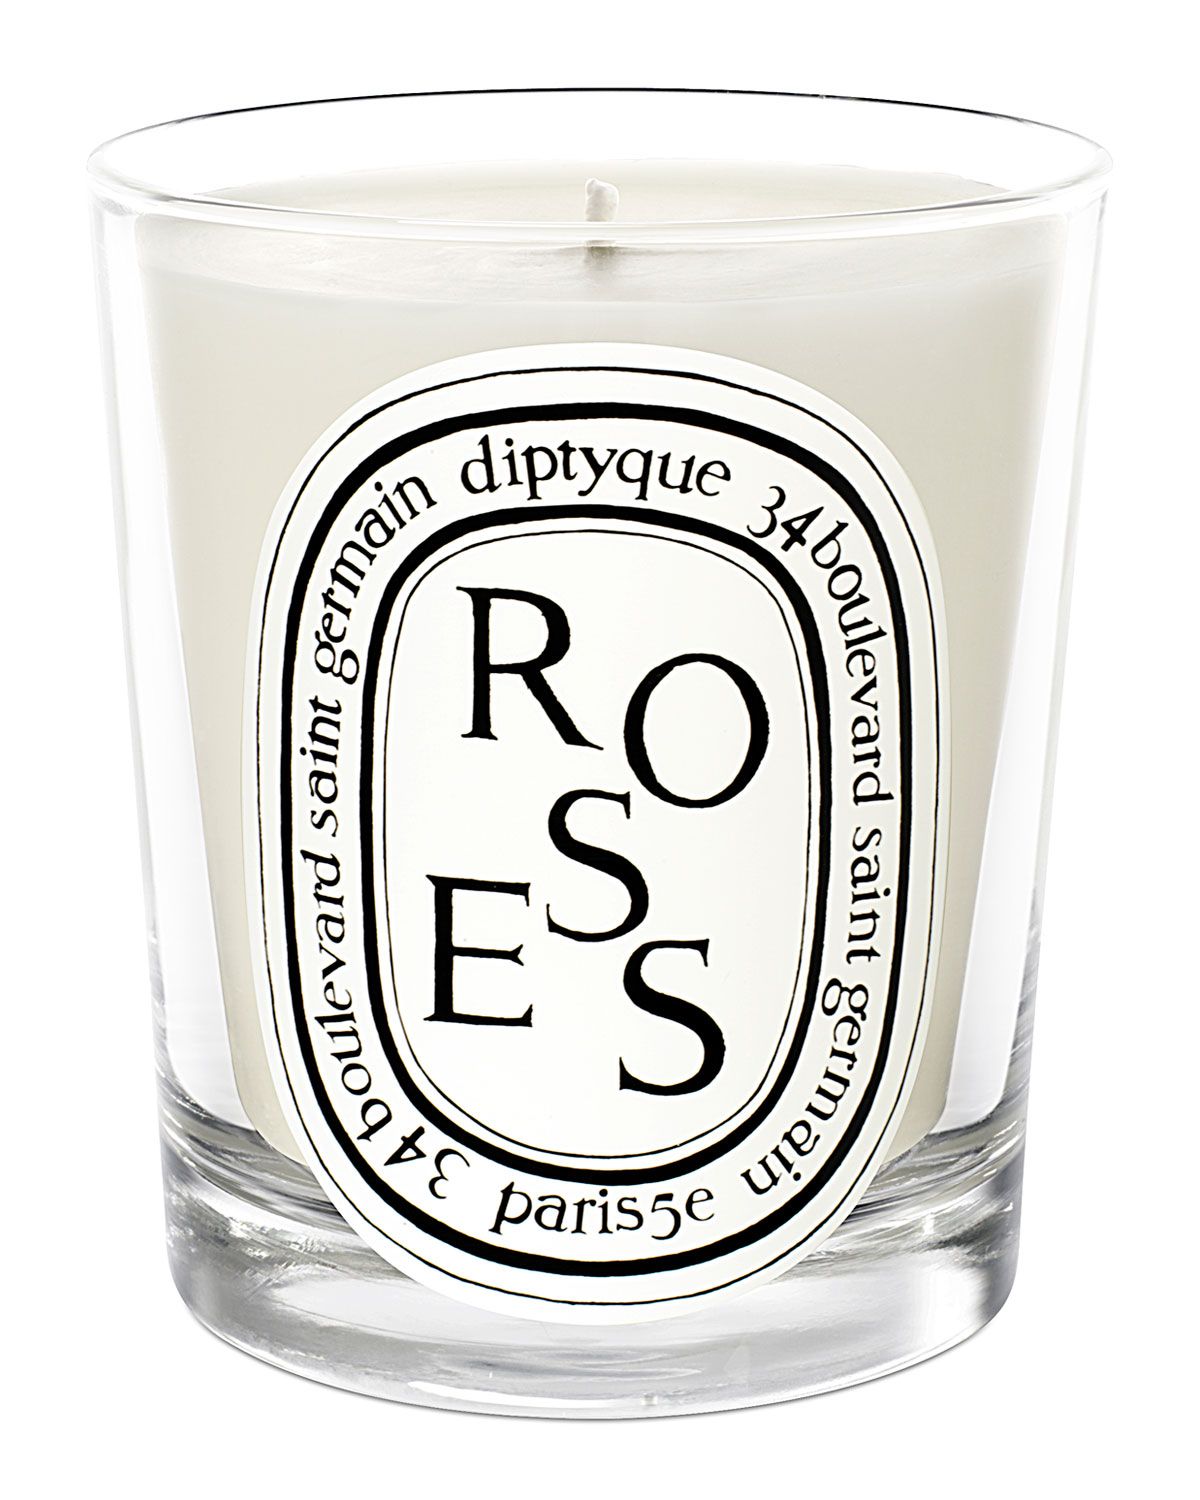 Roses Scented Candle, 190g | Bergdorf Goodman